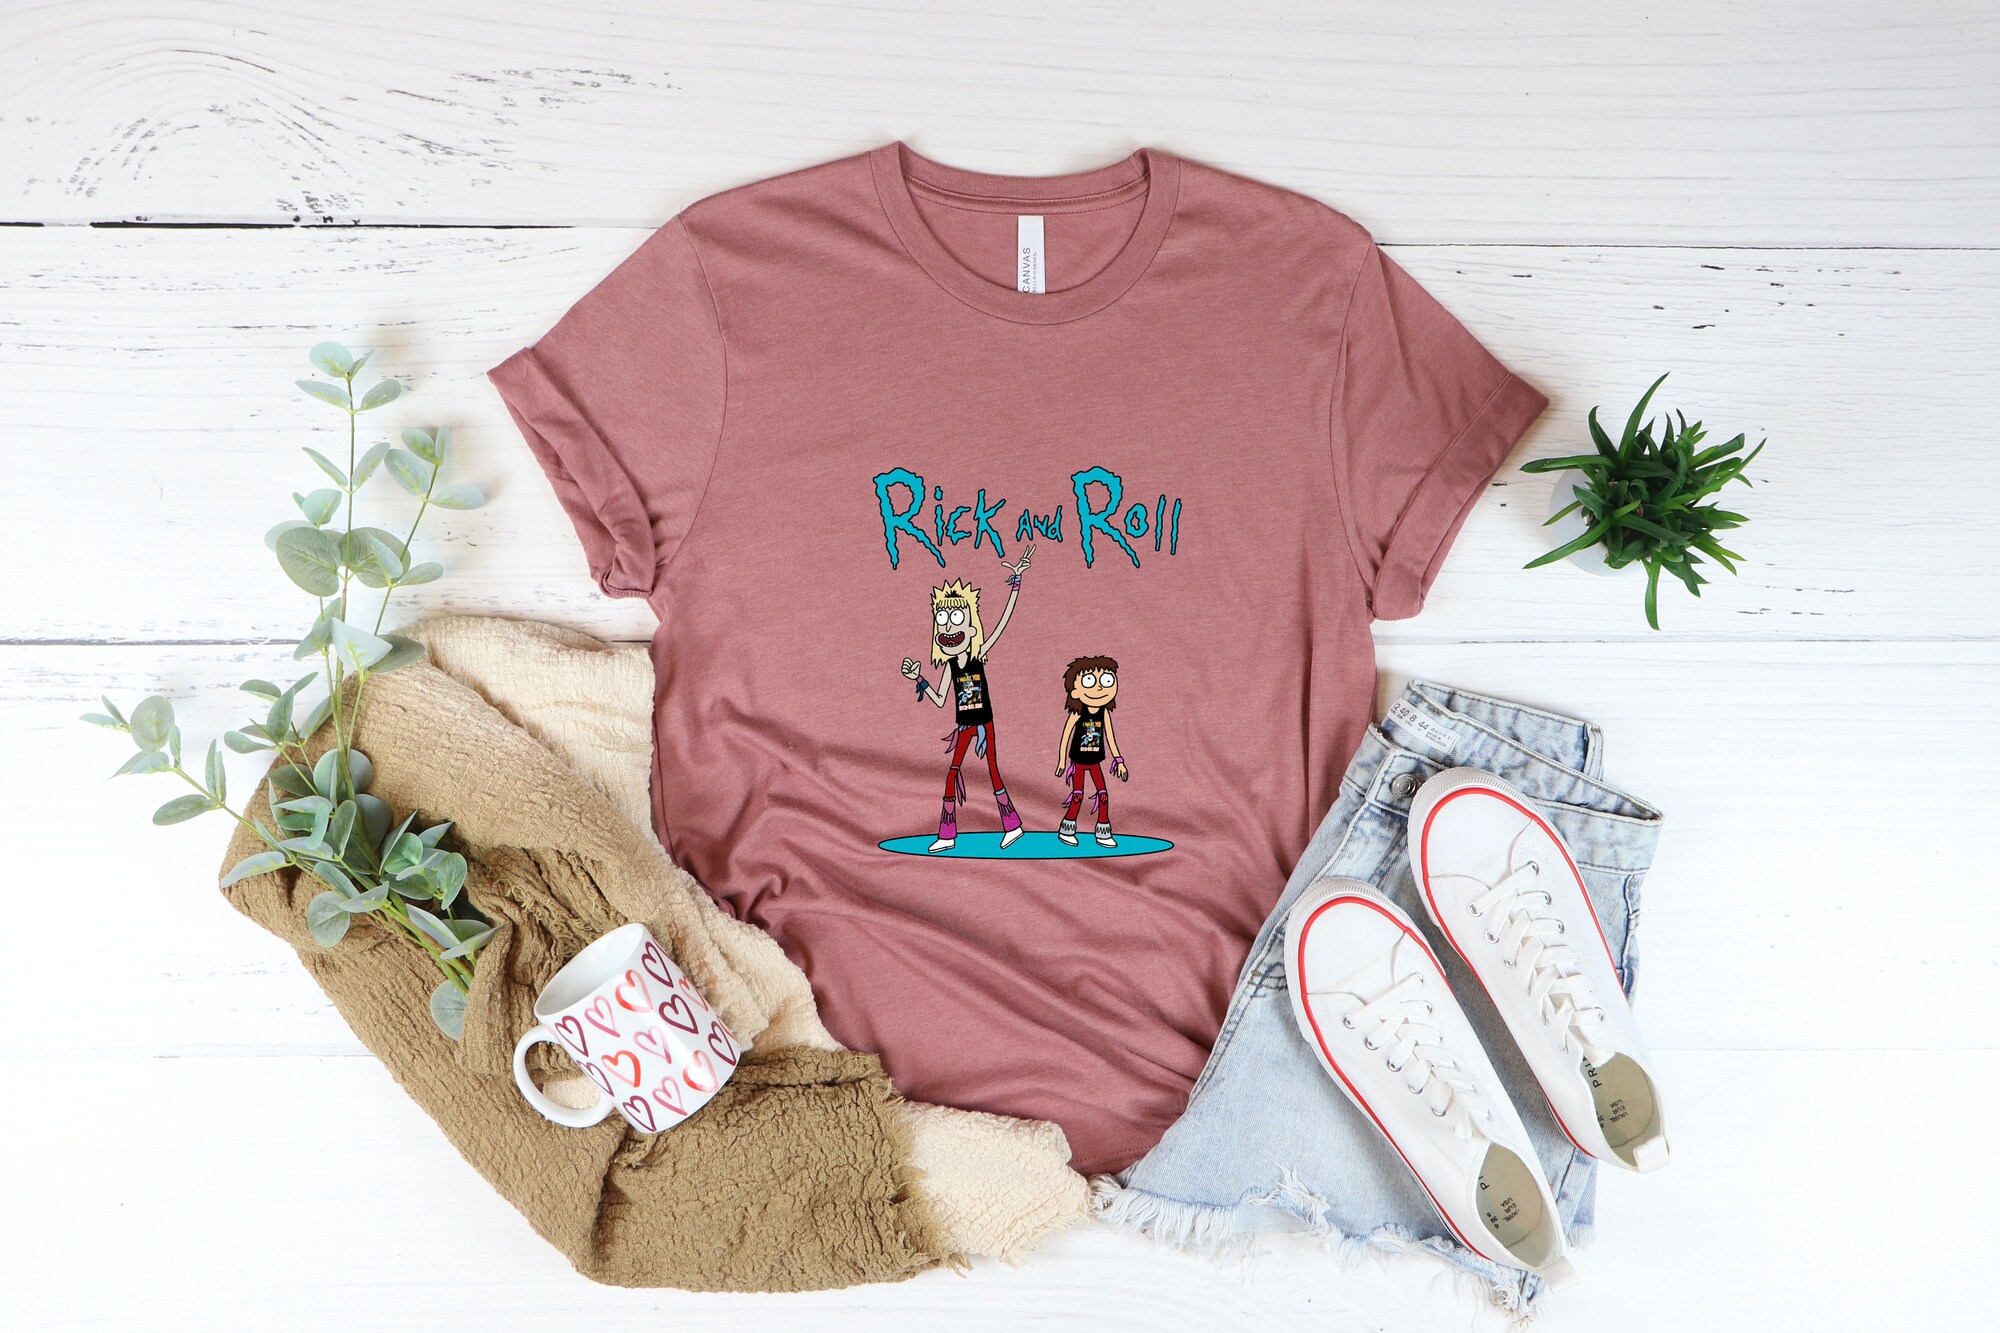 Discover Rick And Roll, Rick And Morty Shirt, Schwifty Shirt, Adult SwimRick Shirt, Rick and Morty Gift, Funny Comedy Cartoon Design Tshirt  #GD0029